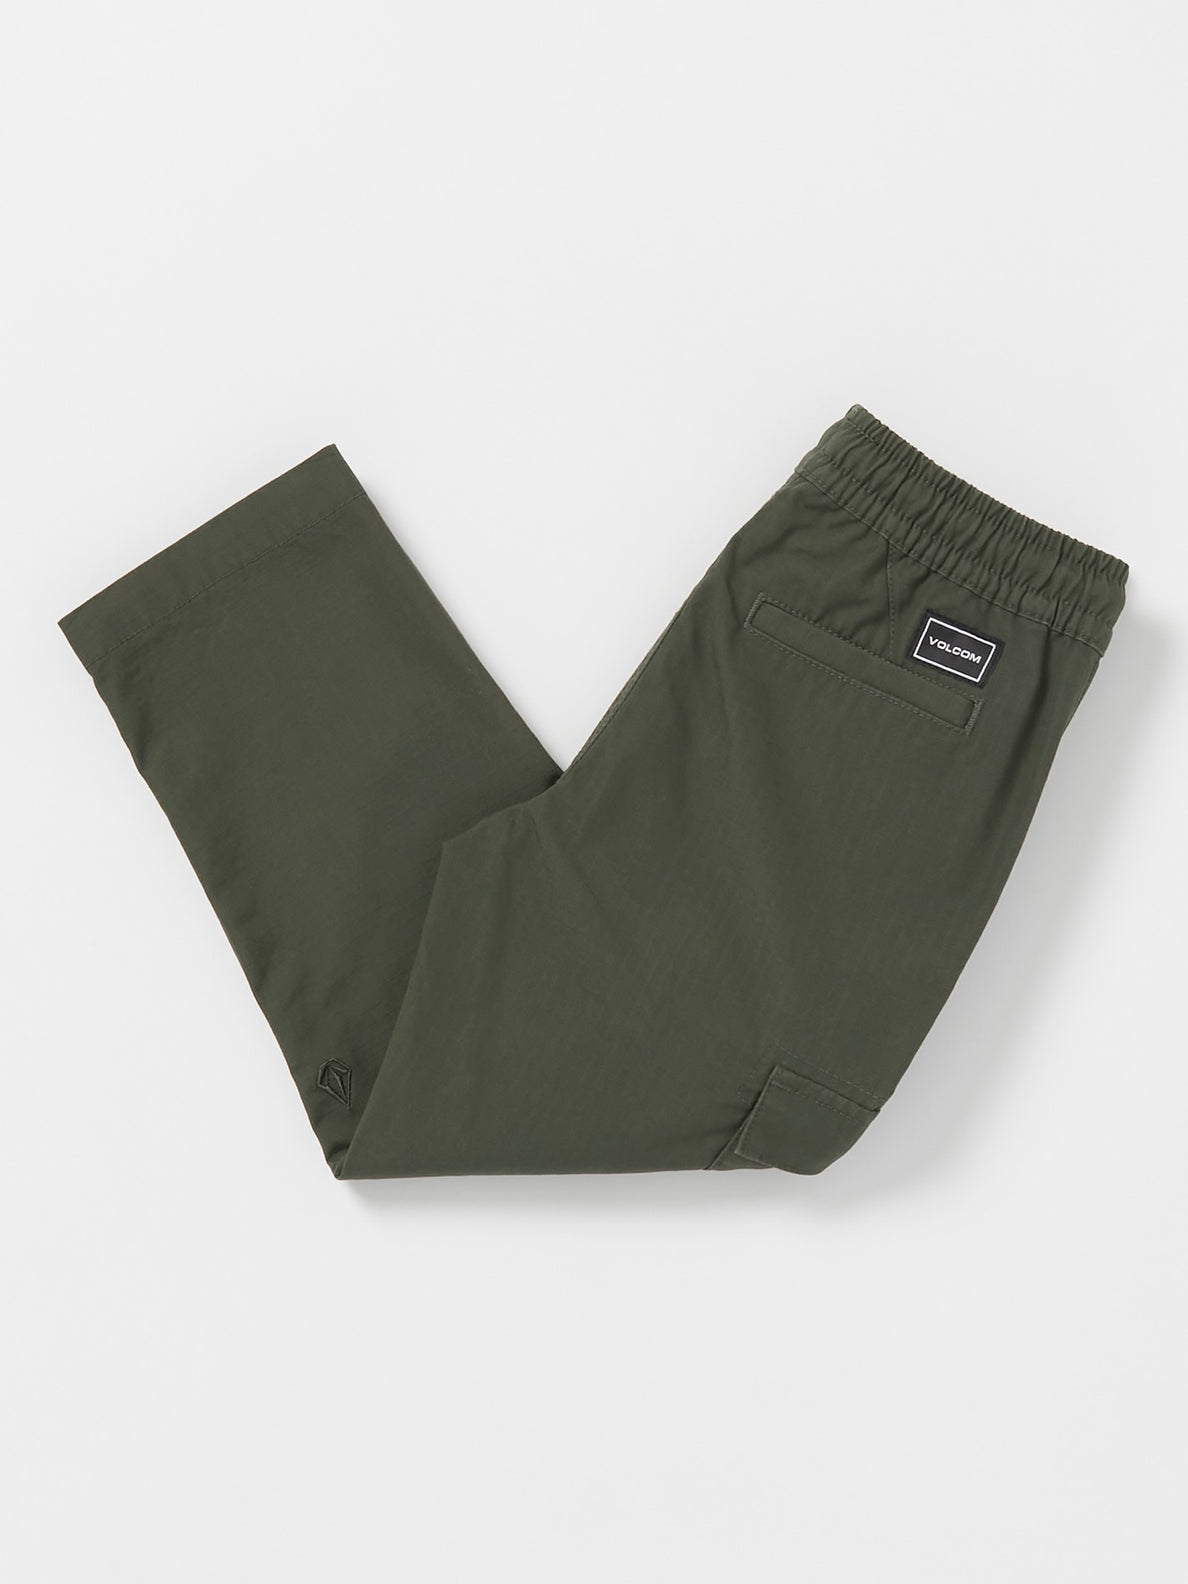 Little Youth March Cargo Elastic Waist Pant - Squadron Green